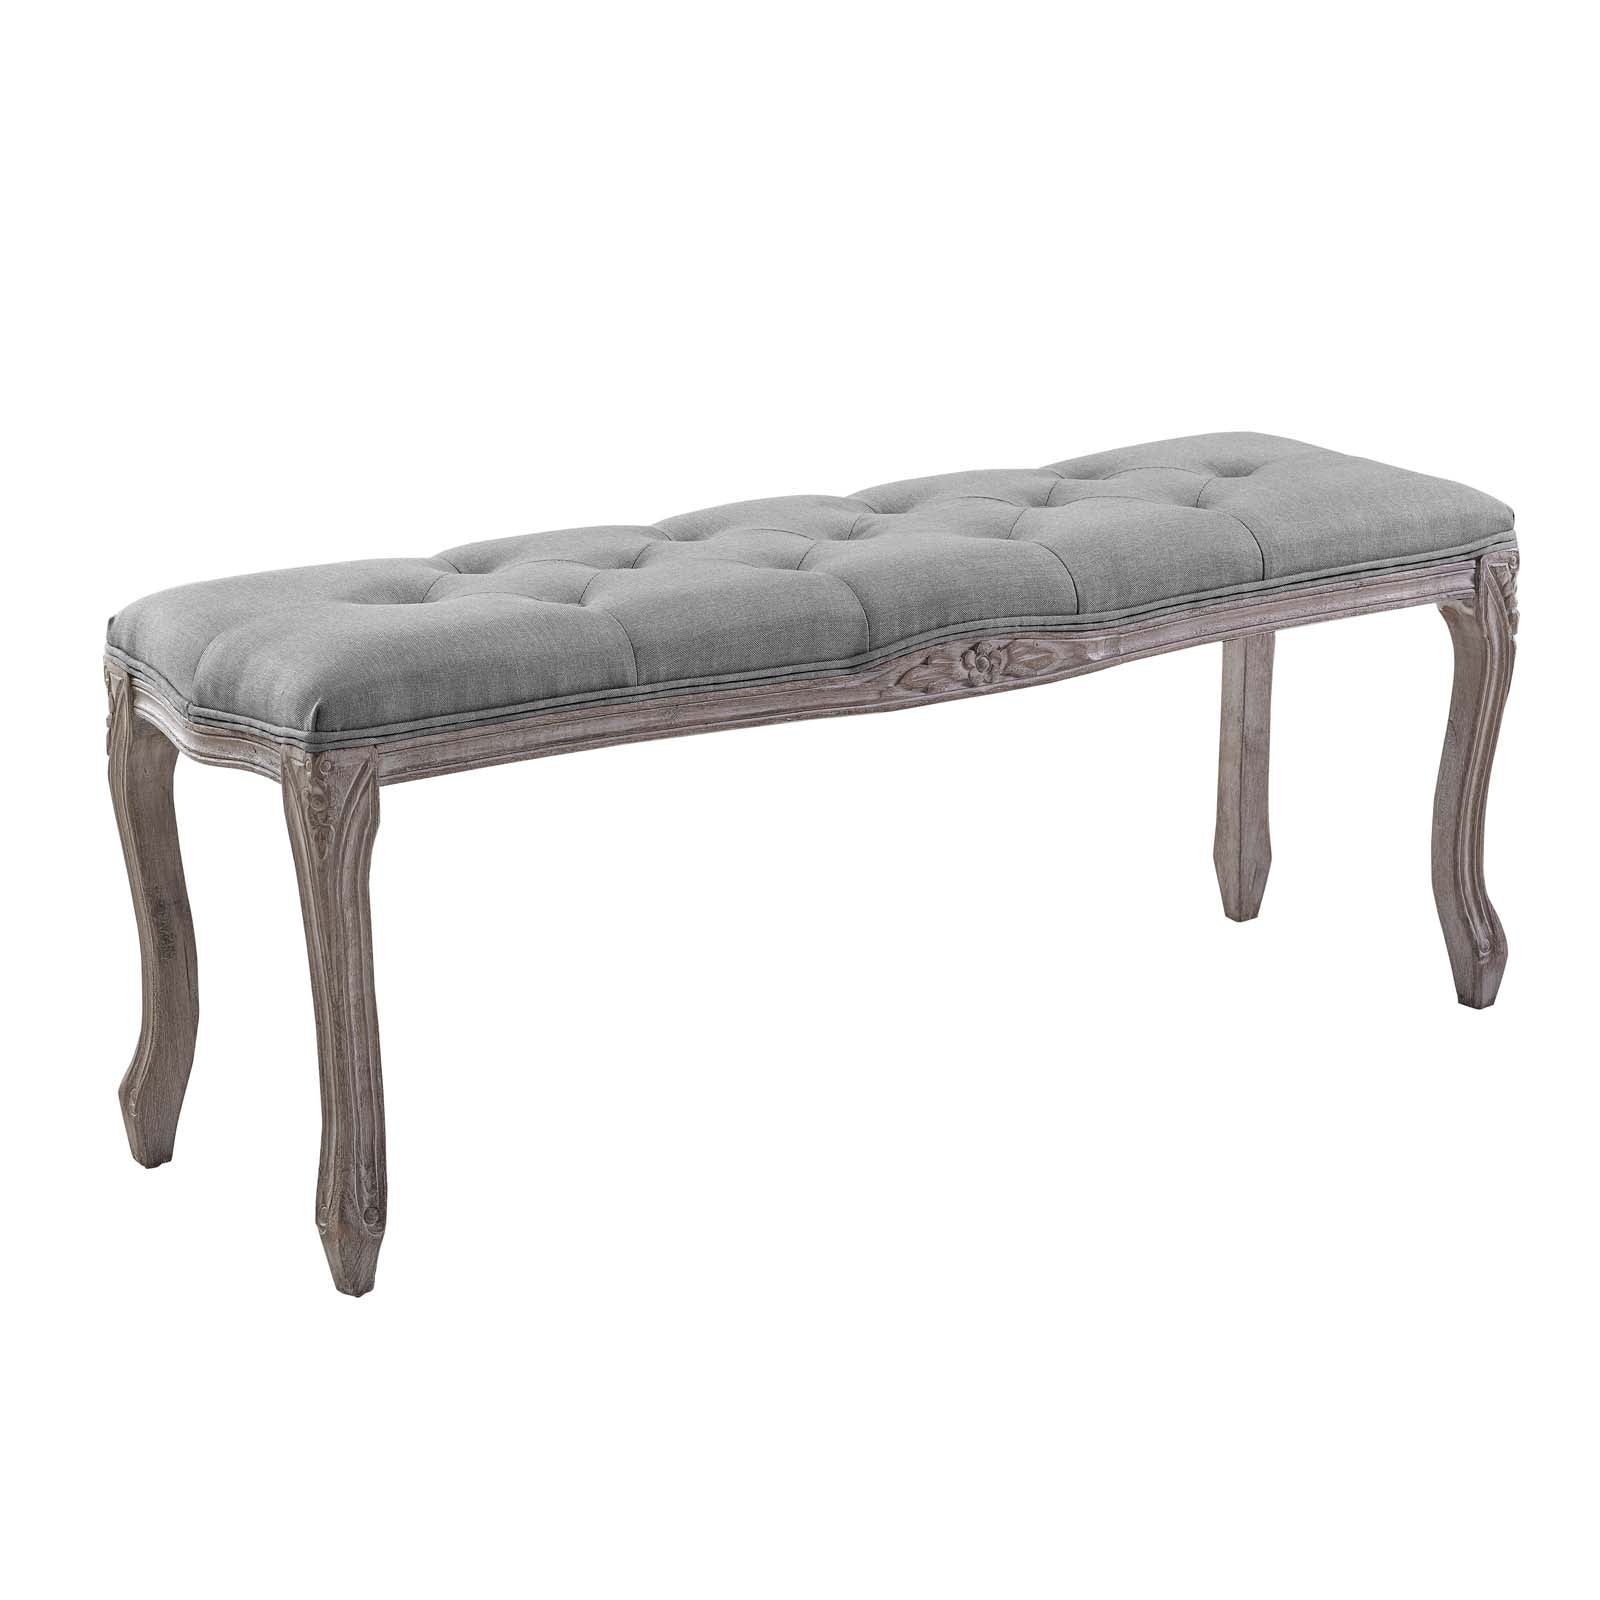 Modway Benches - Regal Vintage French Upholstered Fabric Bench Light Gray